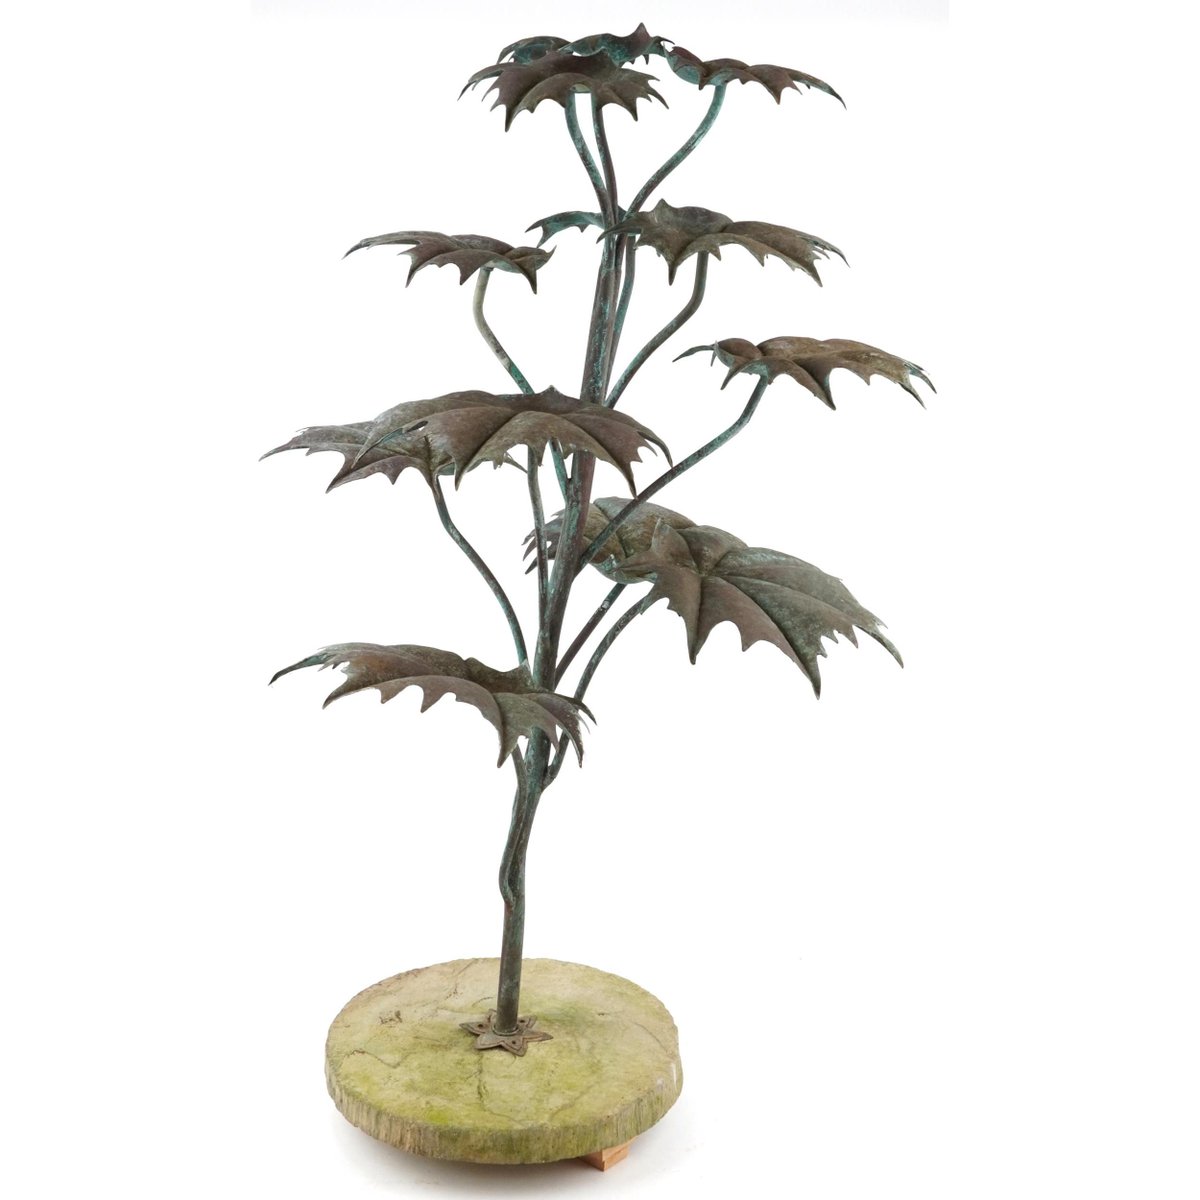 Join us for the Antiques, Collectables, & Jewellery Auction on May 29th at 9:30 AM! 🏺

Lot 244 is this Gary Pickles 2000, verdigris copper garden fountain.

View the catalogue: shorturl.at/HARZY

#eastbourneauctions #copperfountain #stonestonebase #outdoordécor #gardenart